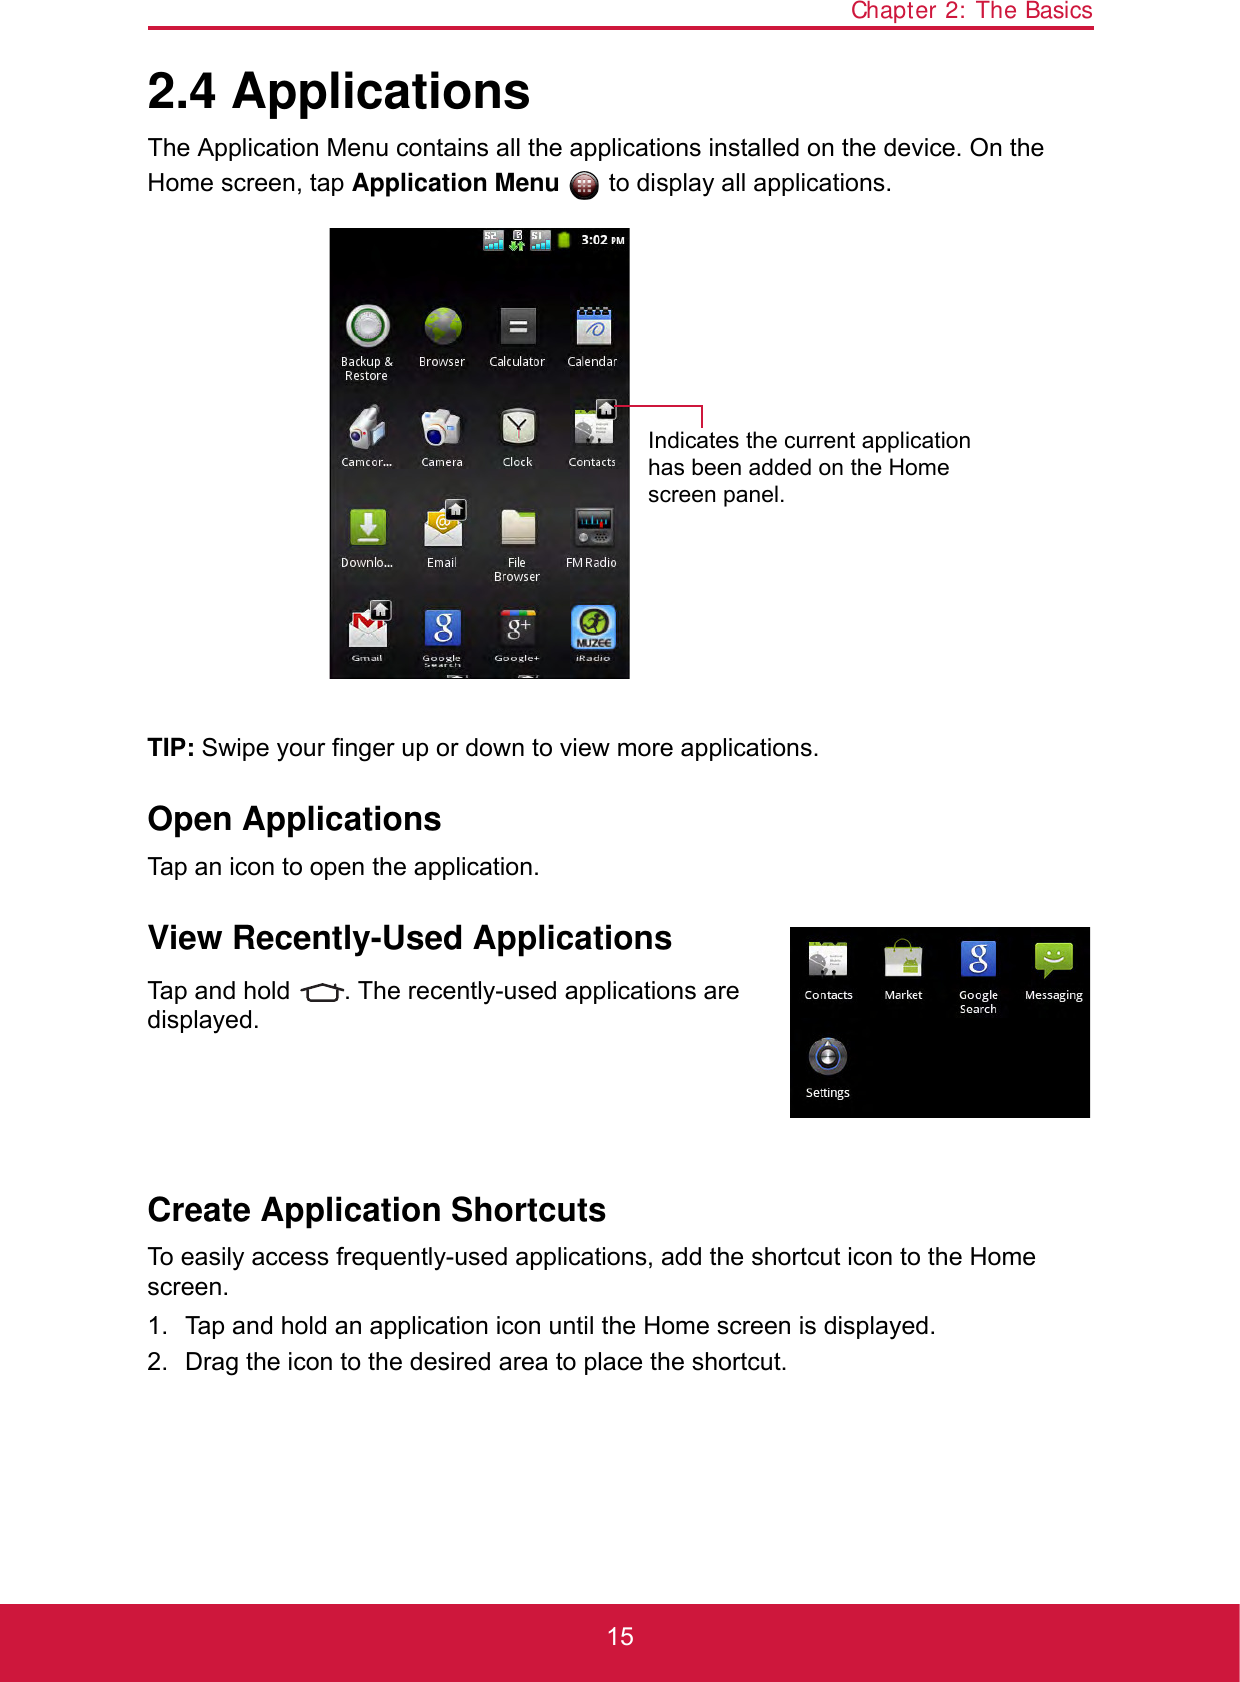 Chapter 2: The Basics152.4 ApplicationsThe Application Menu contains all the applications installed on the device. On the Home screen, tap Application Menu   to display all applications.TIP: Swipe your finger up or down to view more applications.Open ApplicationsTap an icon to open the application.View Recently-Used ApplicationsTap and hold  . The recently-used applications are displayed.Create Application ShortcutsTo easily access frequently-used applications, add the shortcut icon to the Home screen.1. Tap and hold an application icon until the Home screen is displayed.2. Drag the icon to the desired area to place the shortcut.Indicates the current application has been added on the Home screen panel.